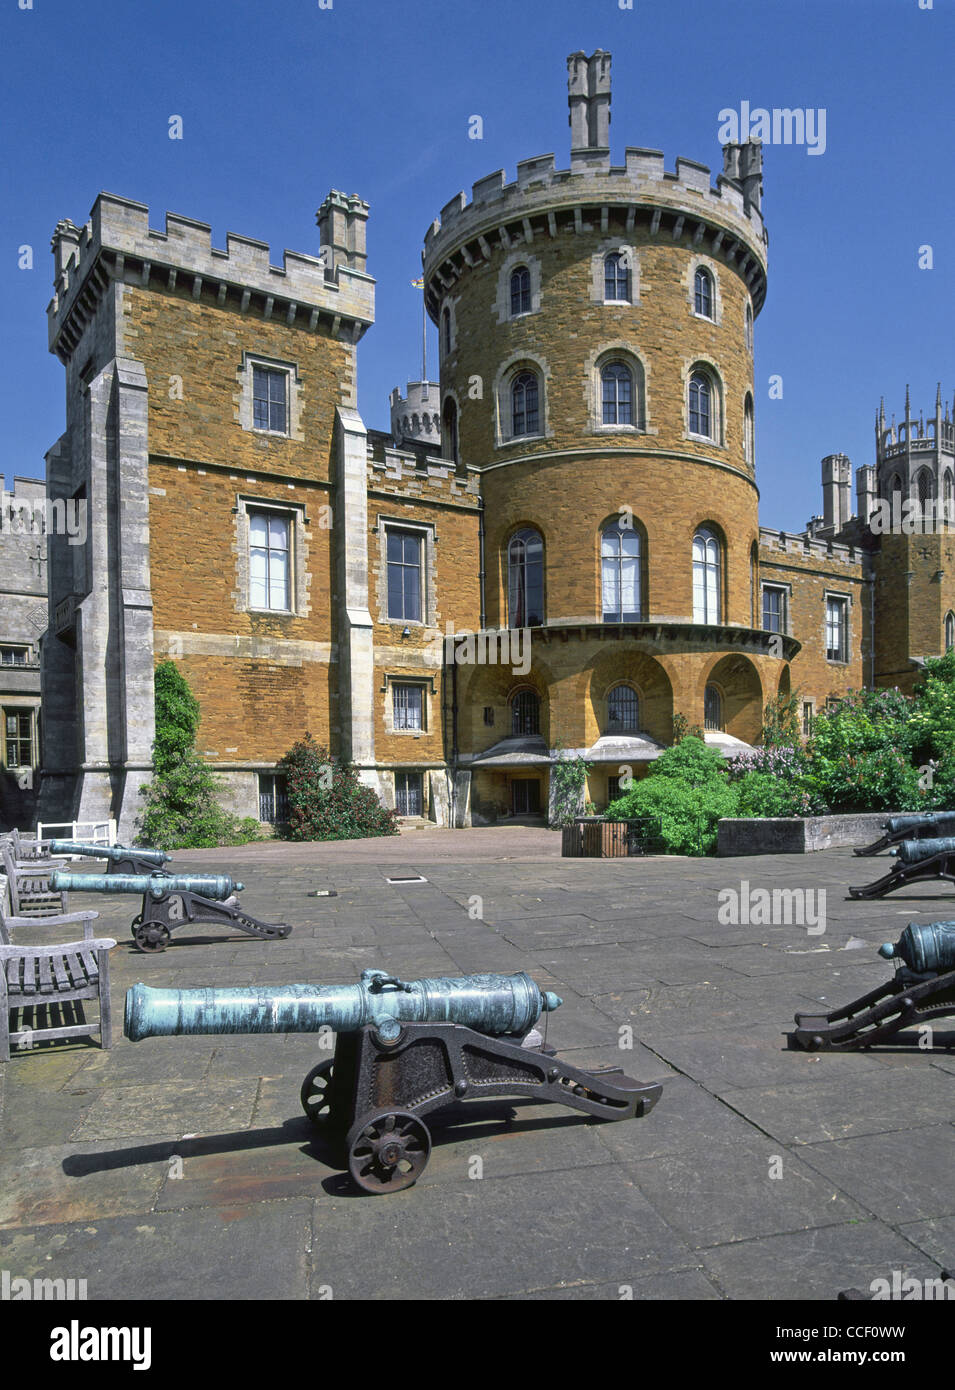 Historical Belvoir Castle stately home & heritage mansion open as tourism centre & set in English countryside near Grantham Leicestershire English UK Stock Photo